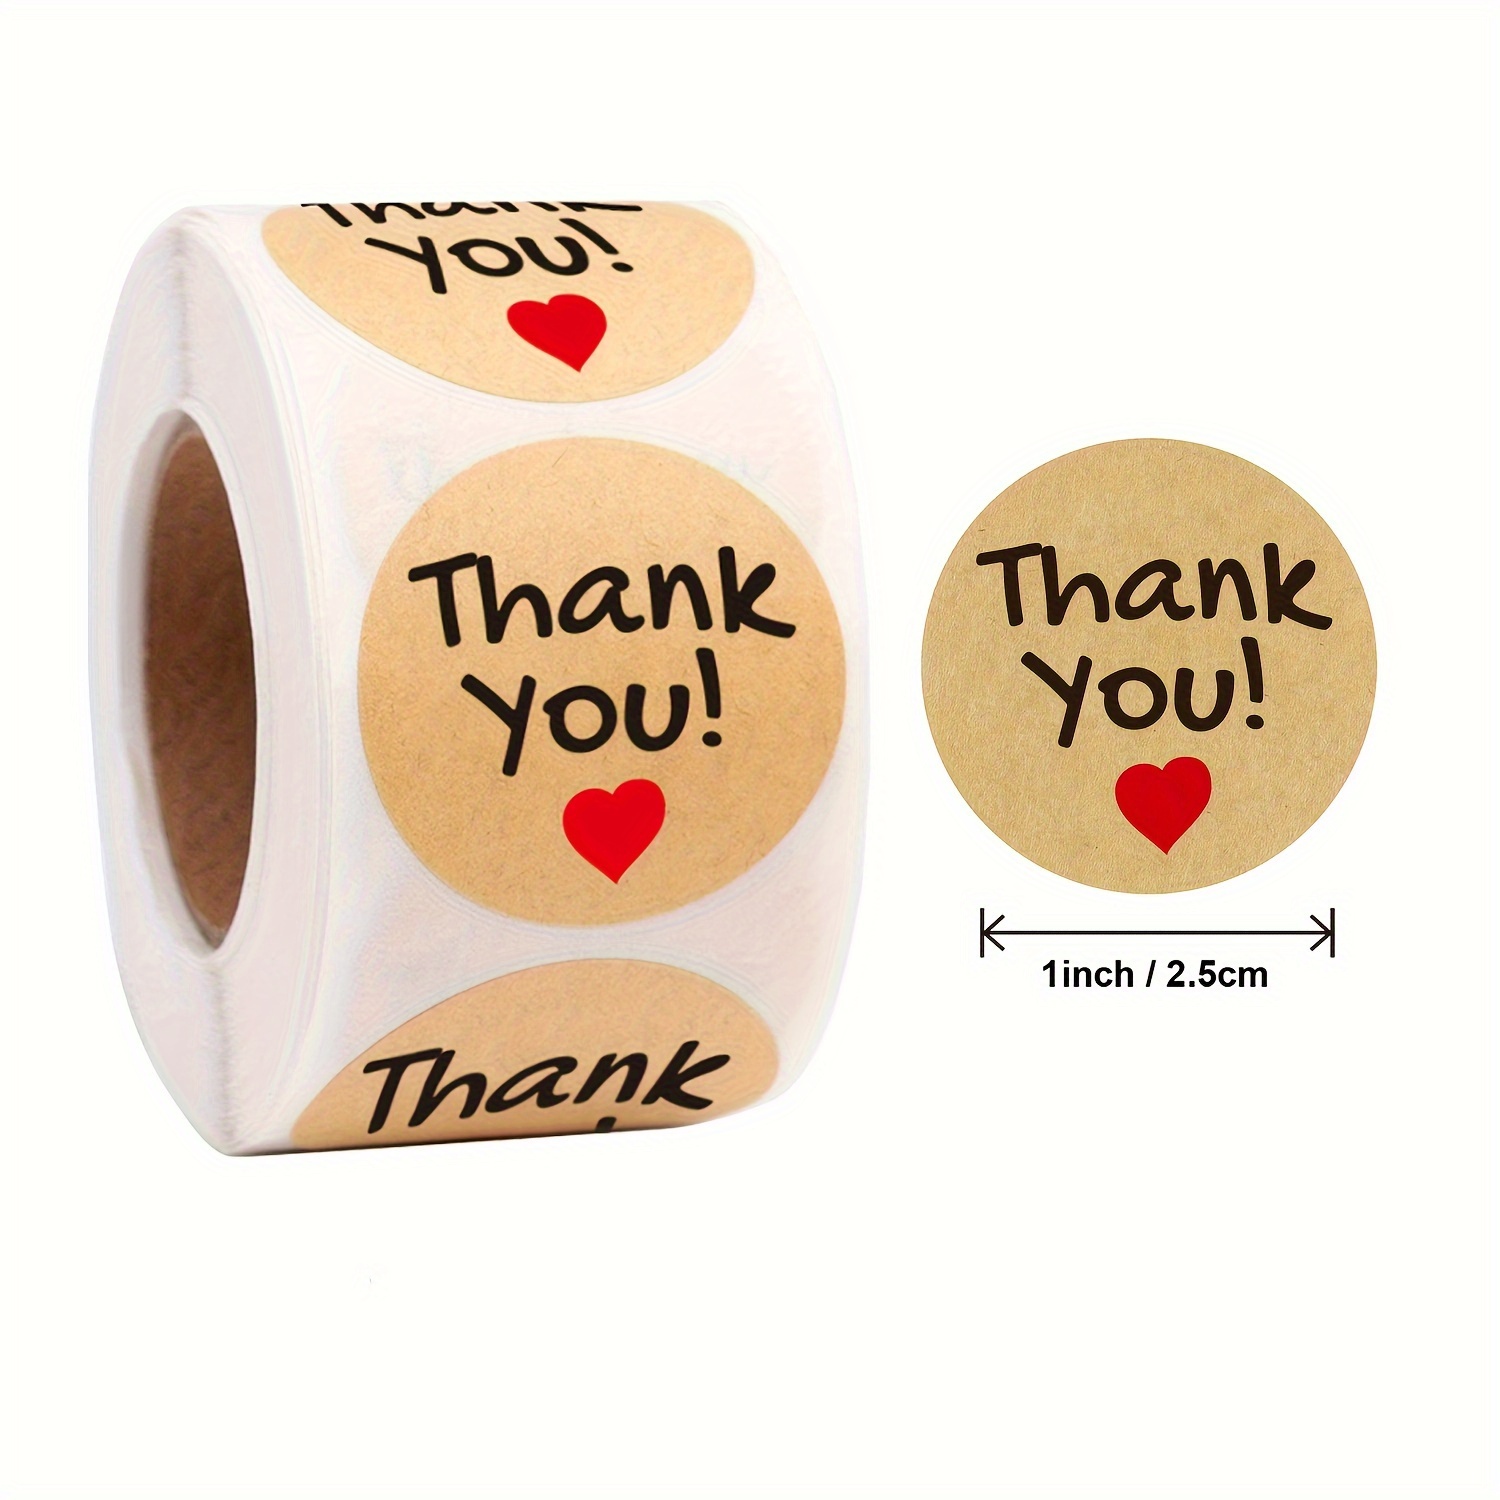 Recollections Handmade with Love Label Stickers - 48 ct